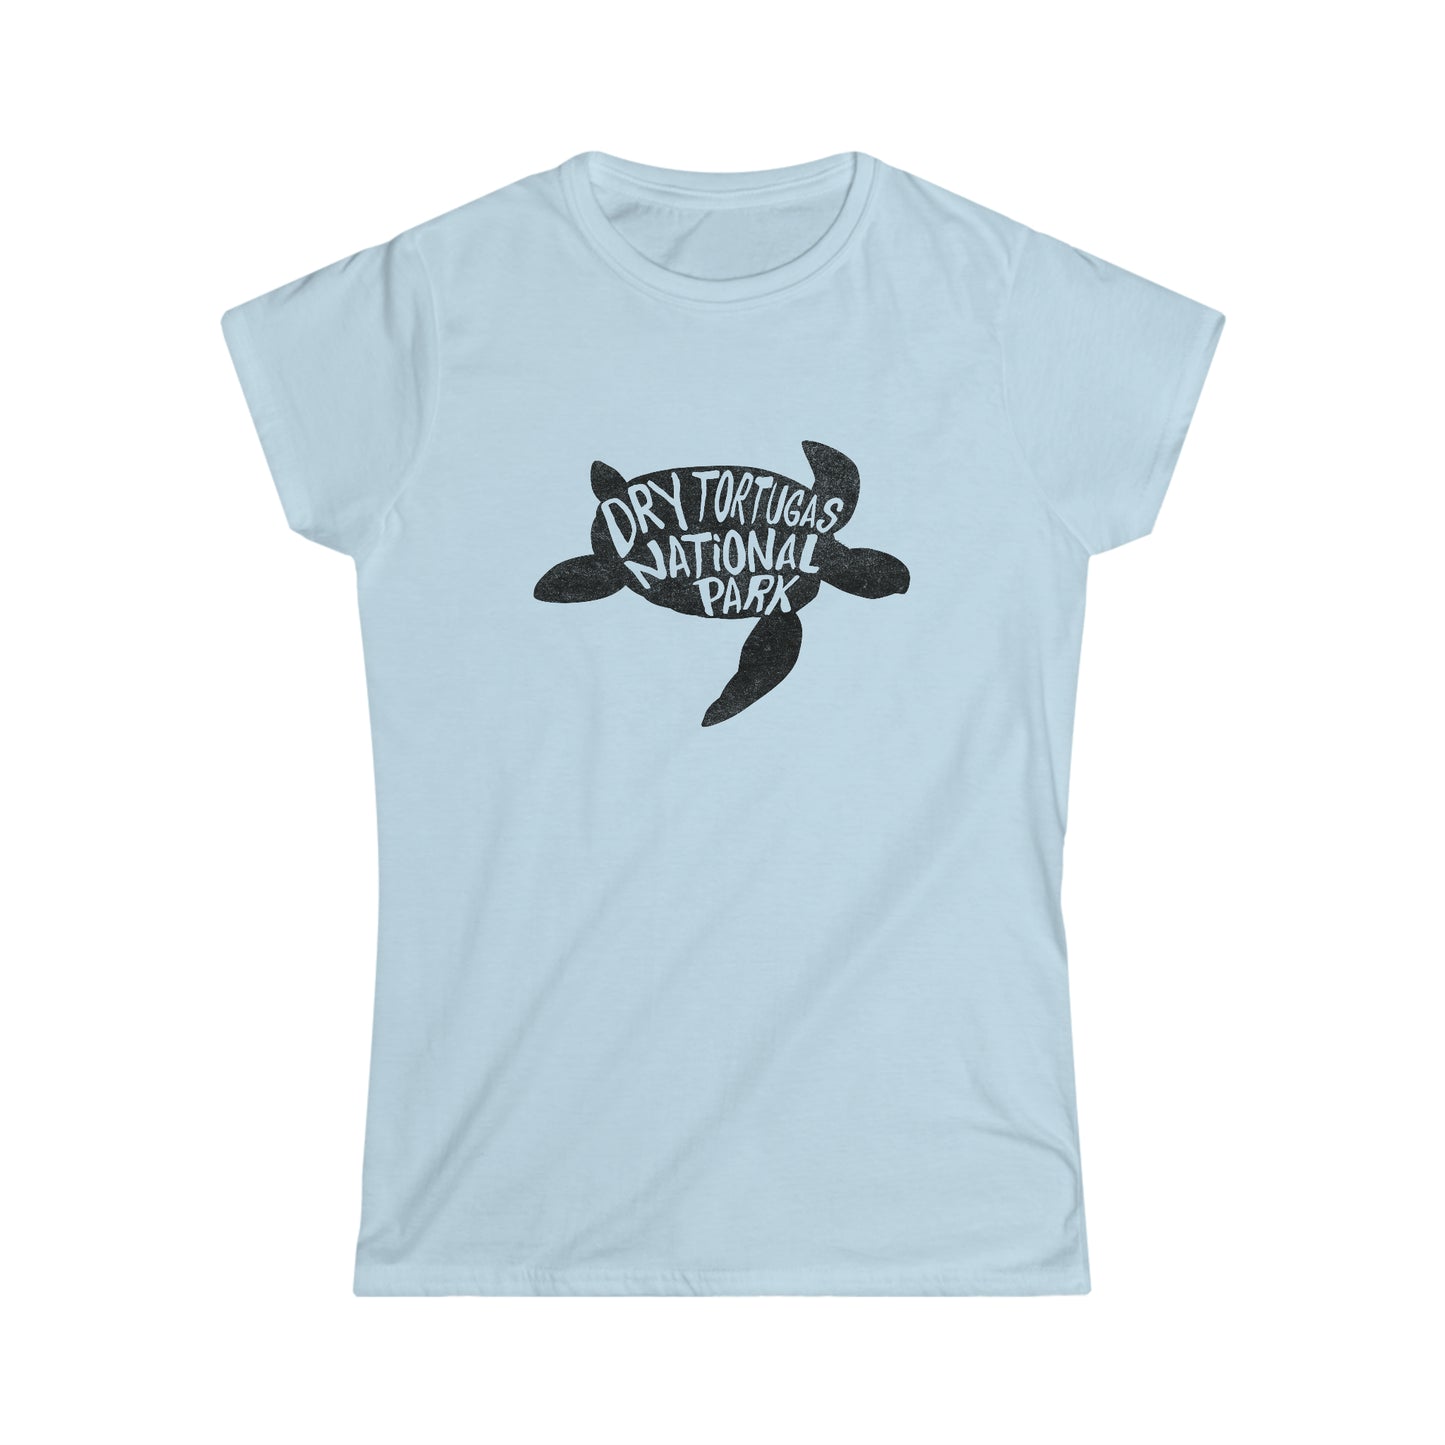 Dry Tortugas National Park Women's T-Shirt - Turtle